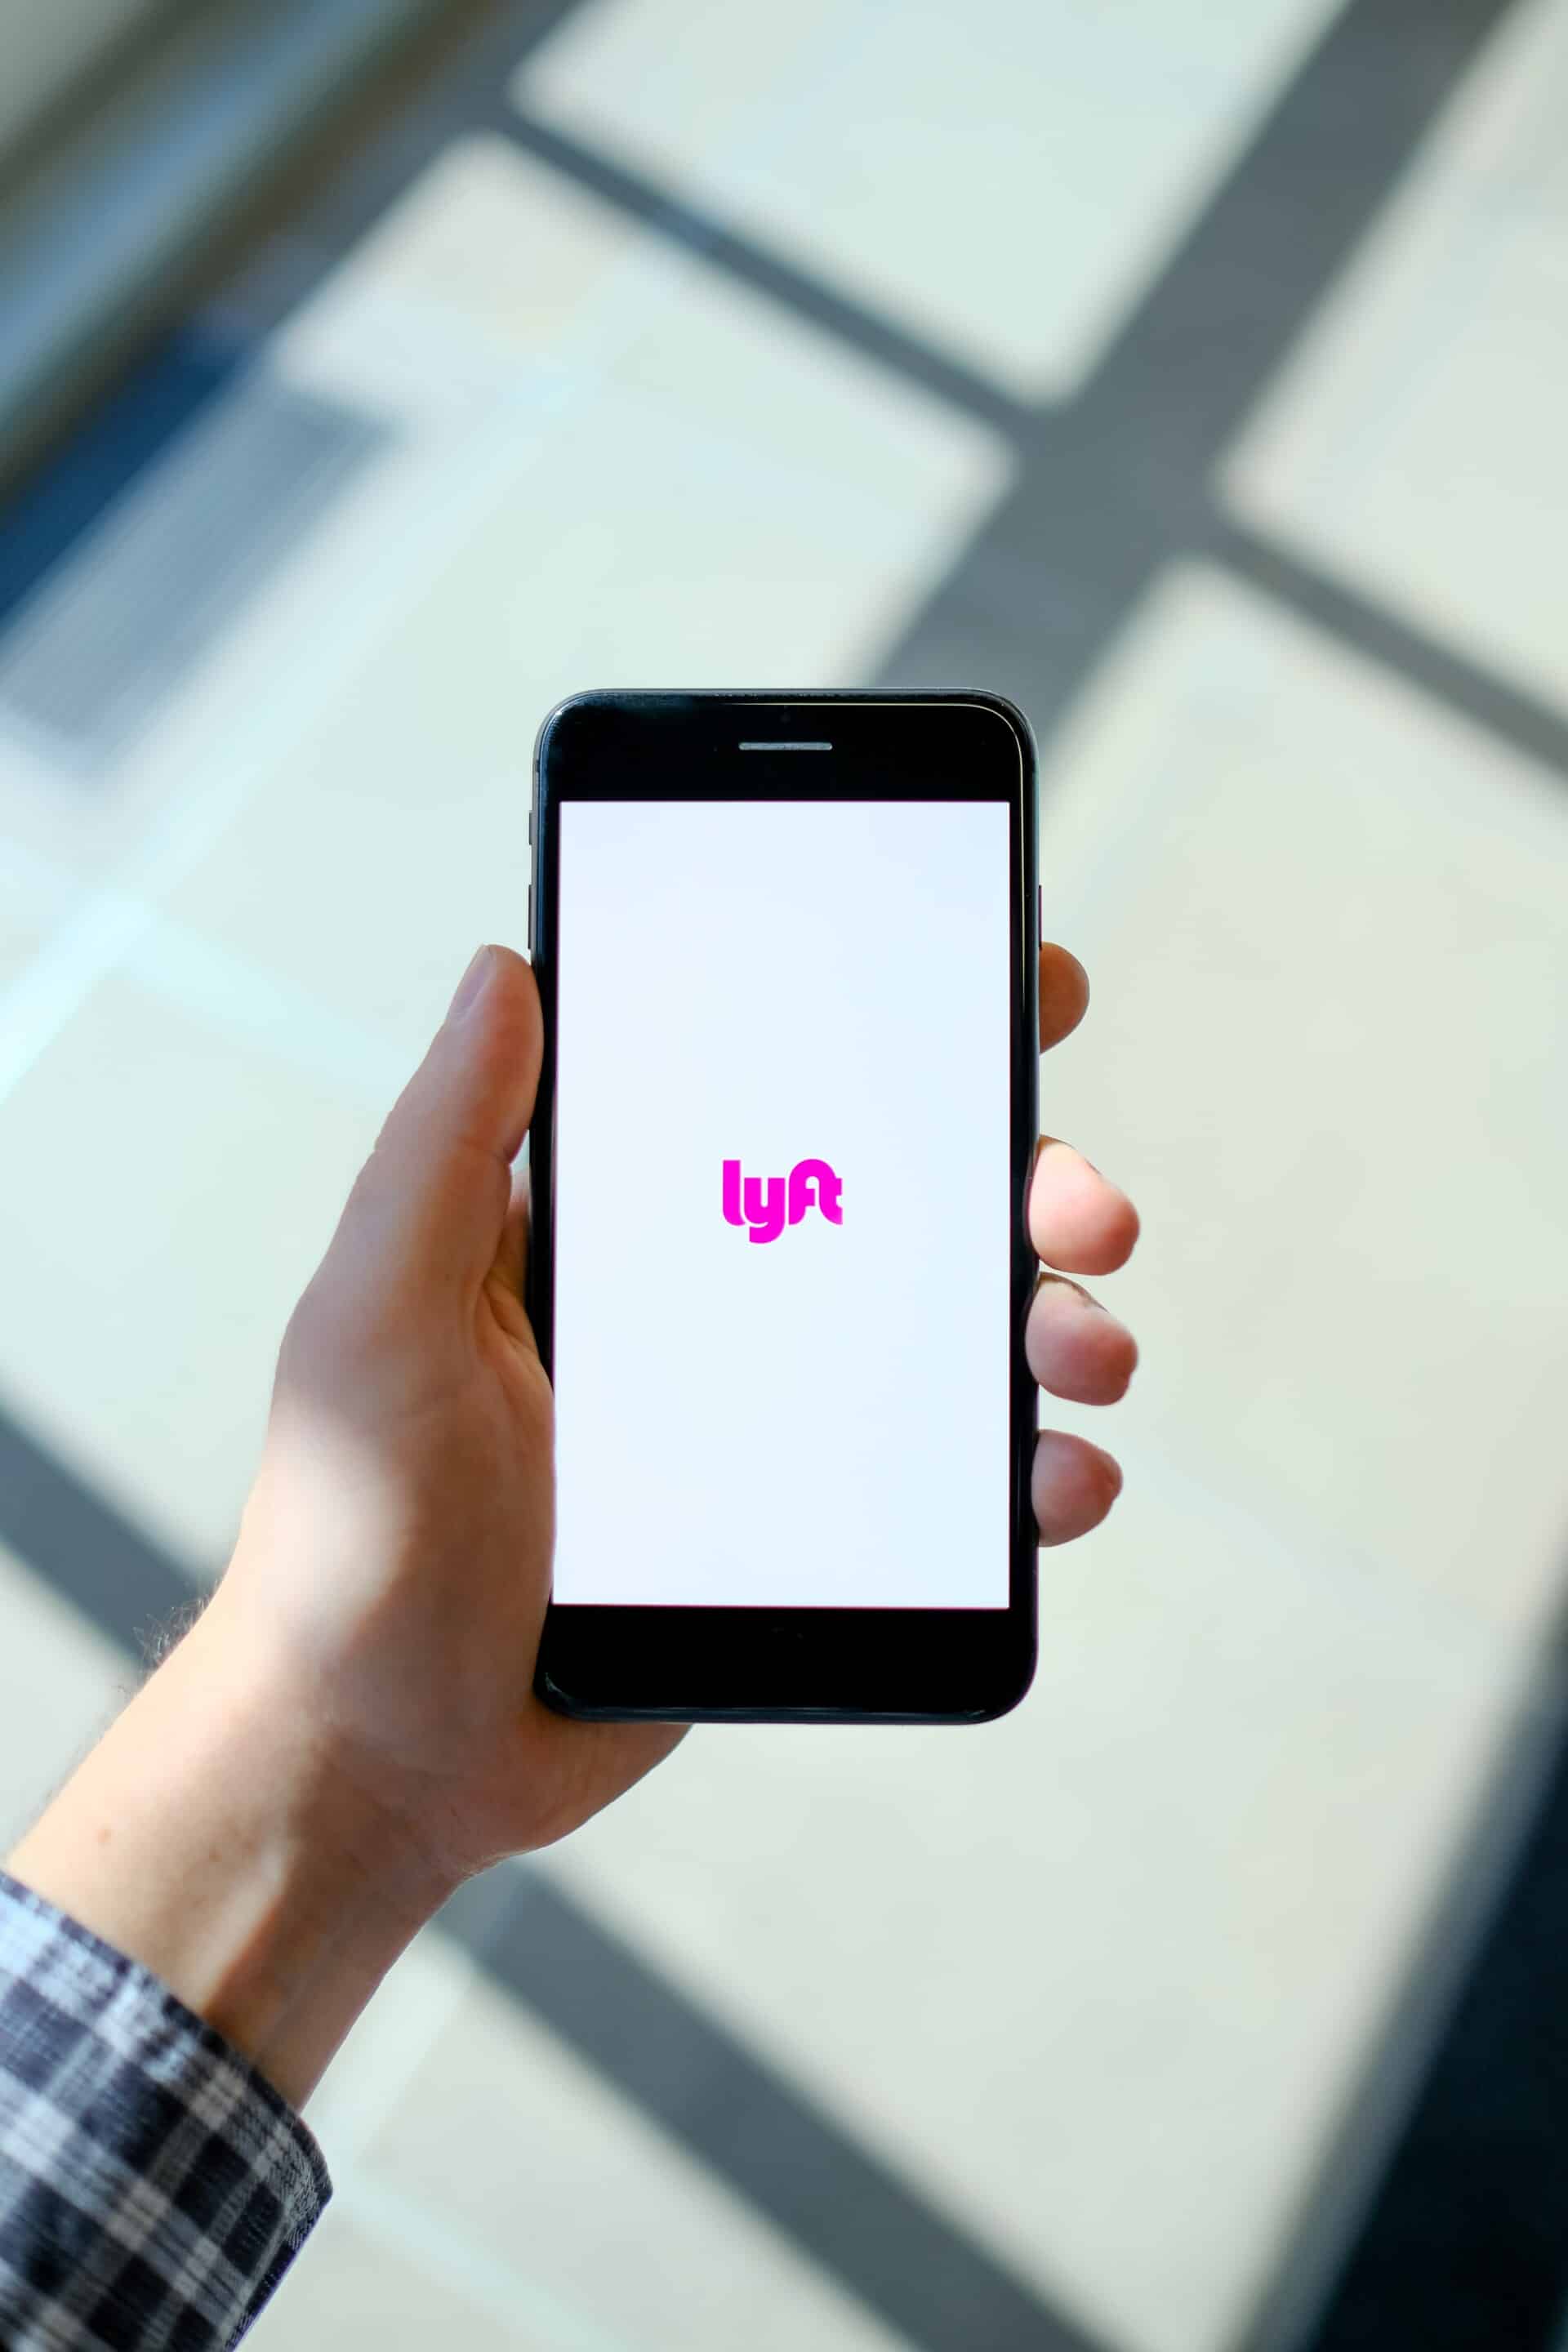 Typo in Lyft’s Earnings Report Causes Stock Fluctuations